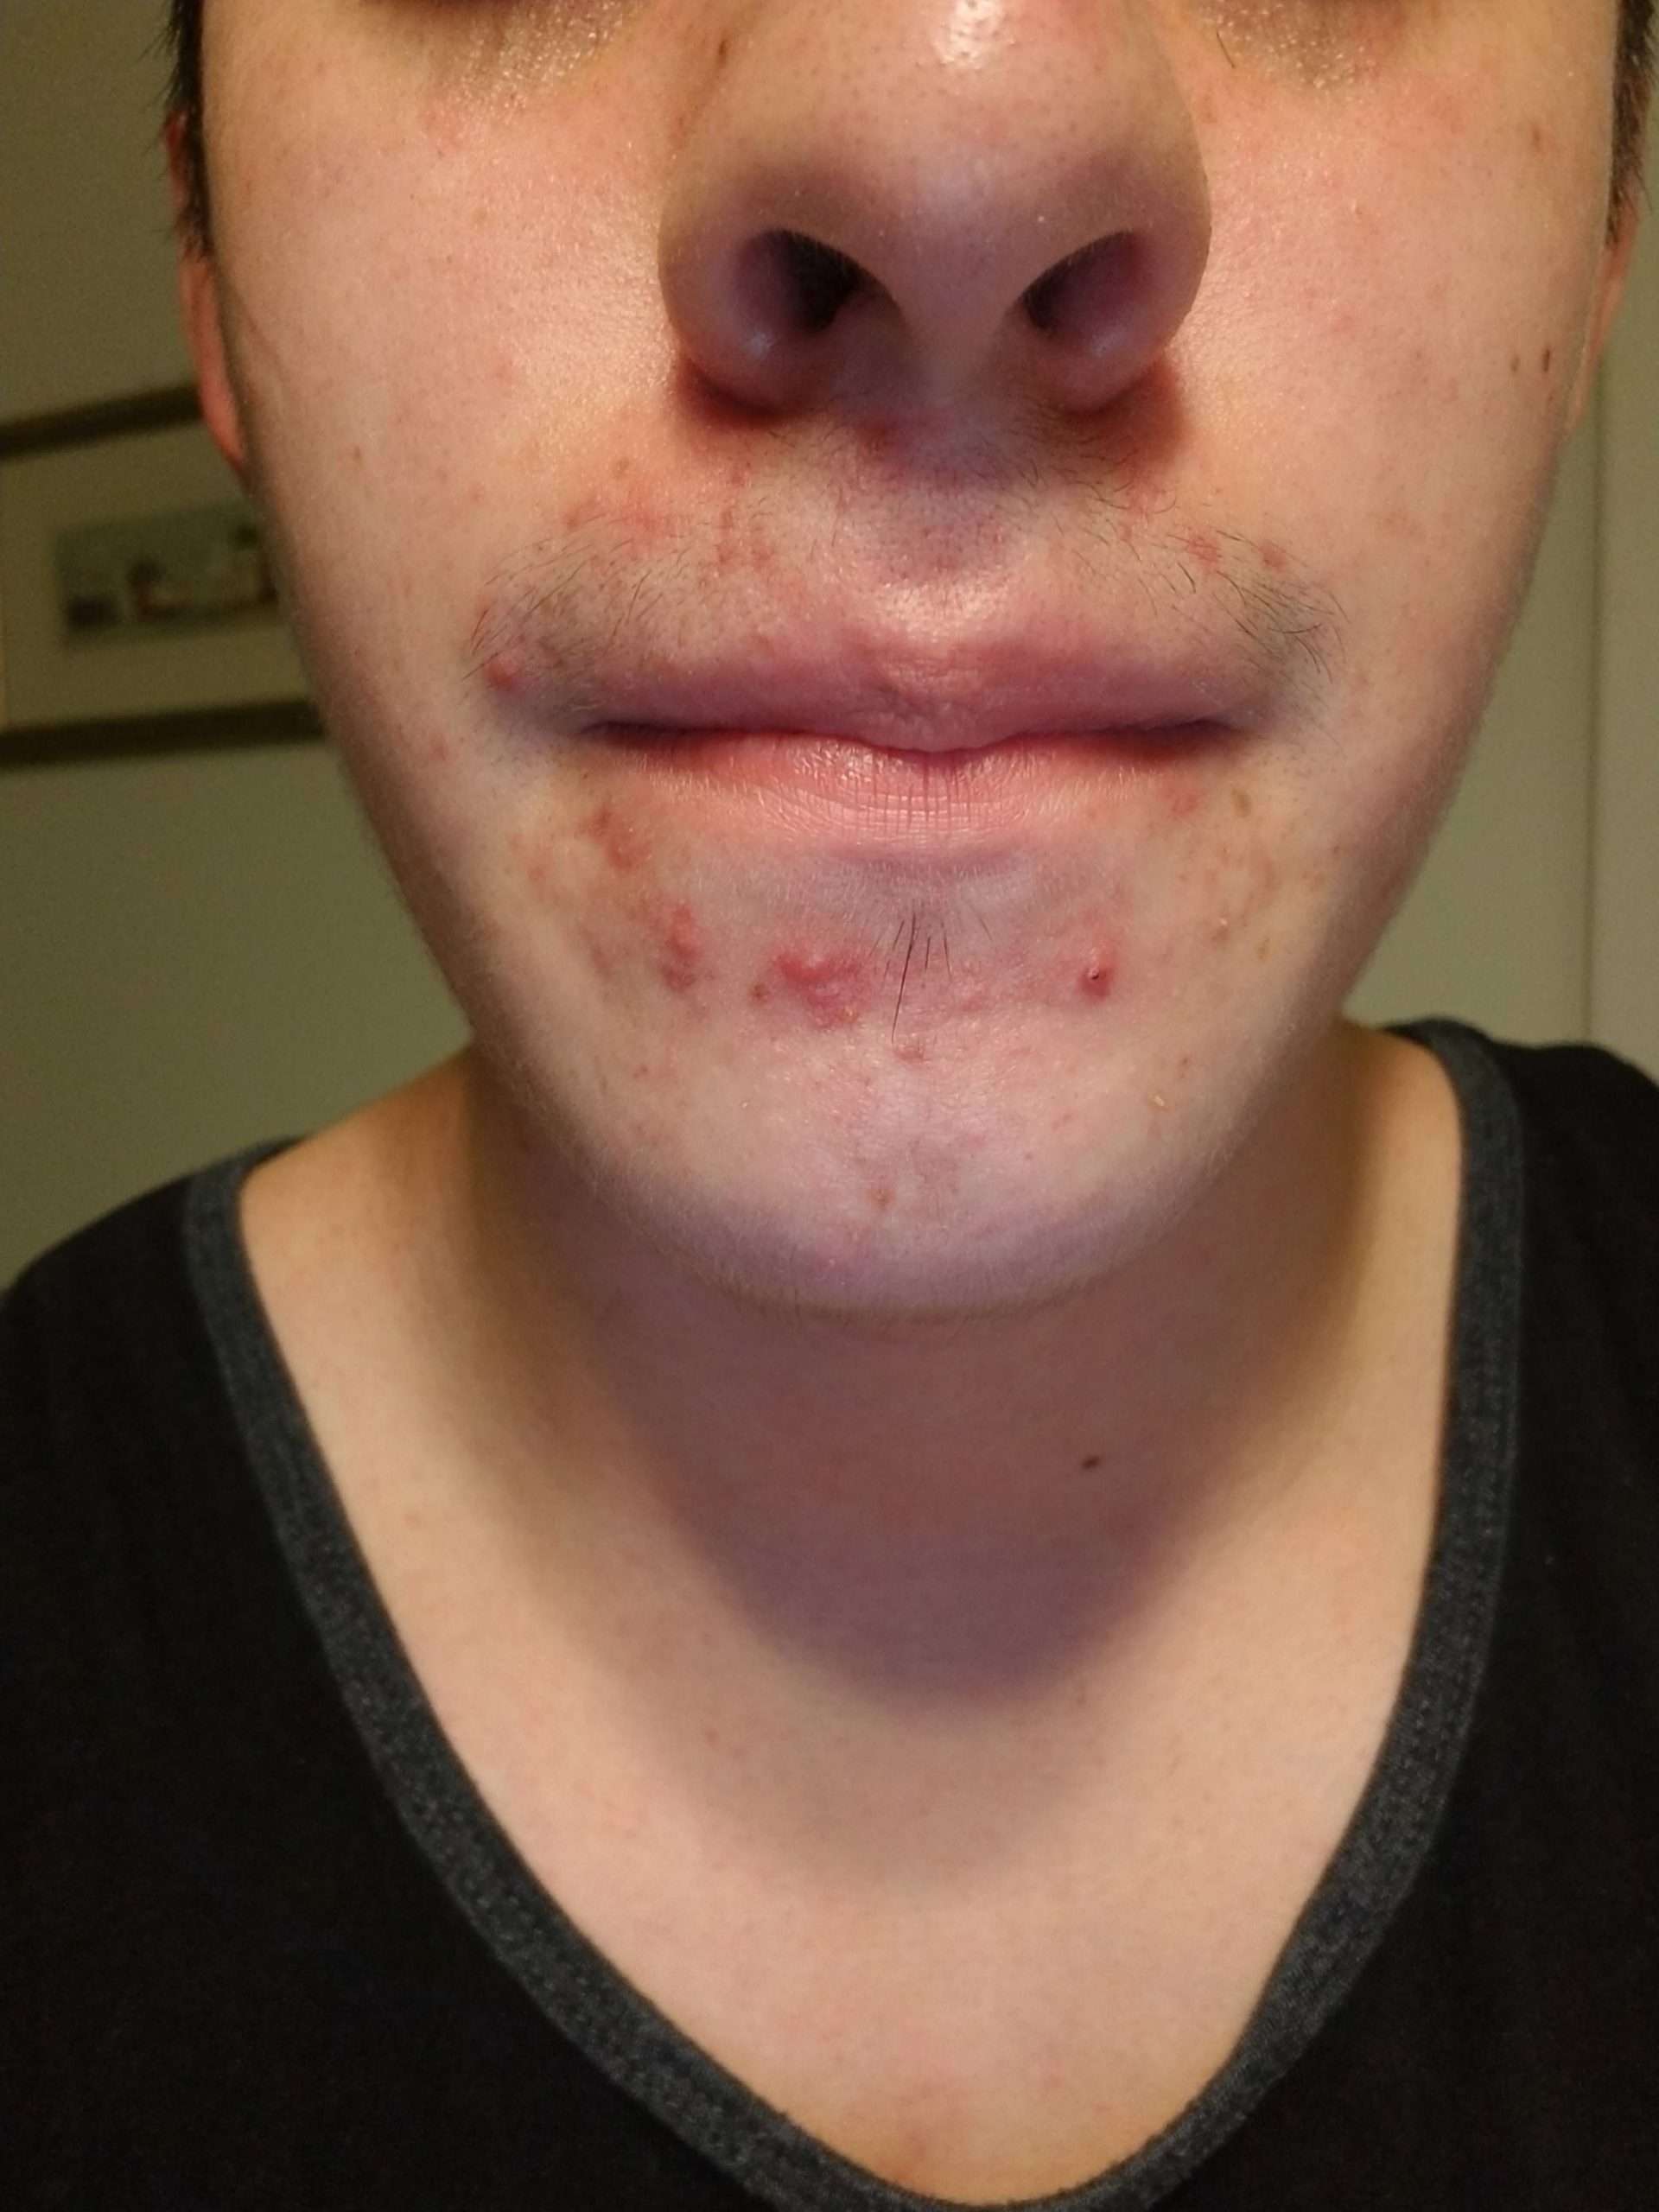 [Acne] Consistent acne around mouth and chin ...